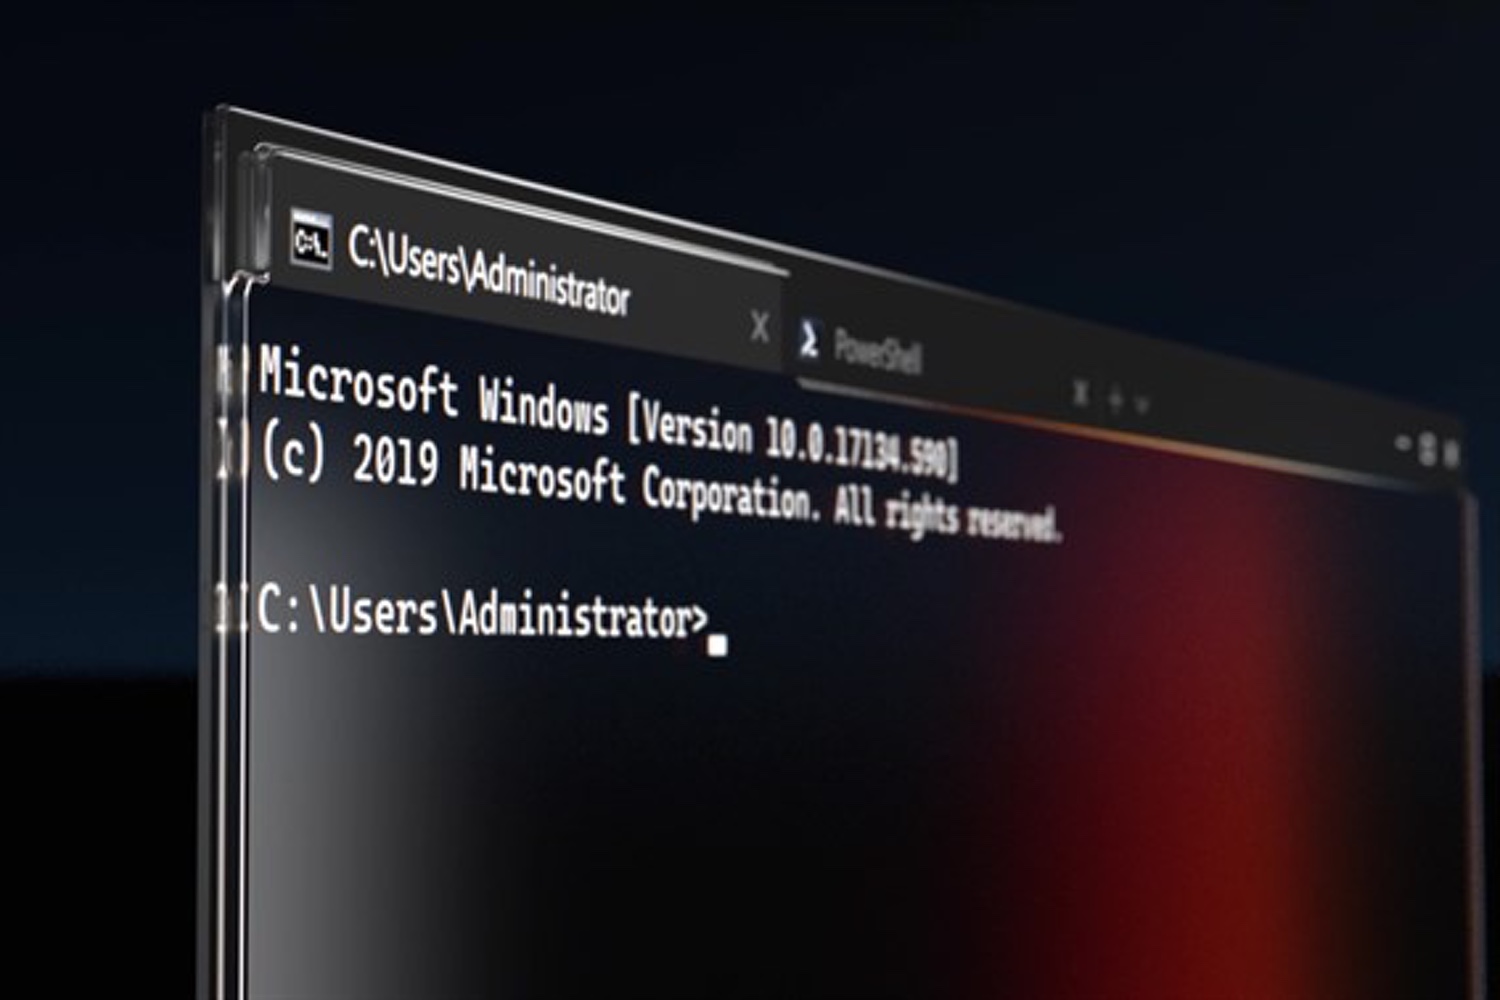 terminal software for windows 10